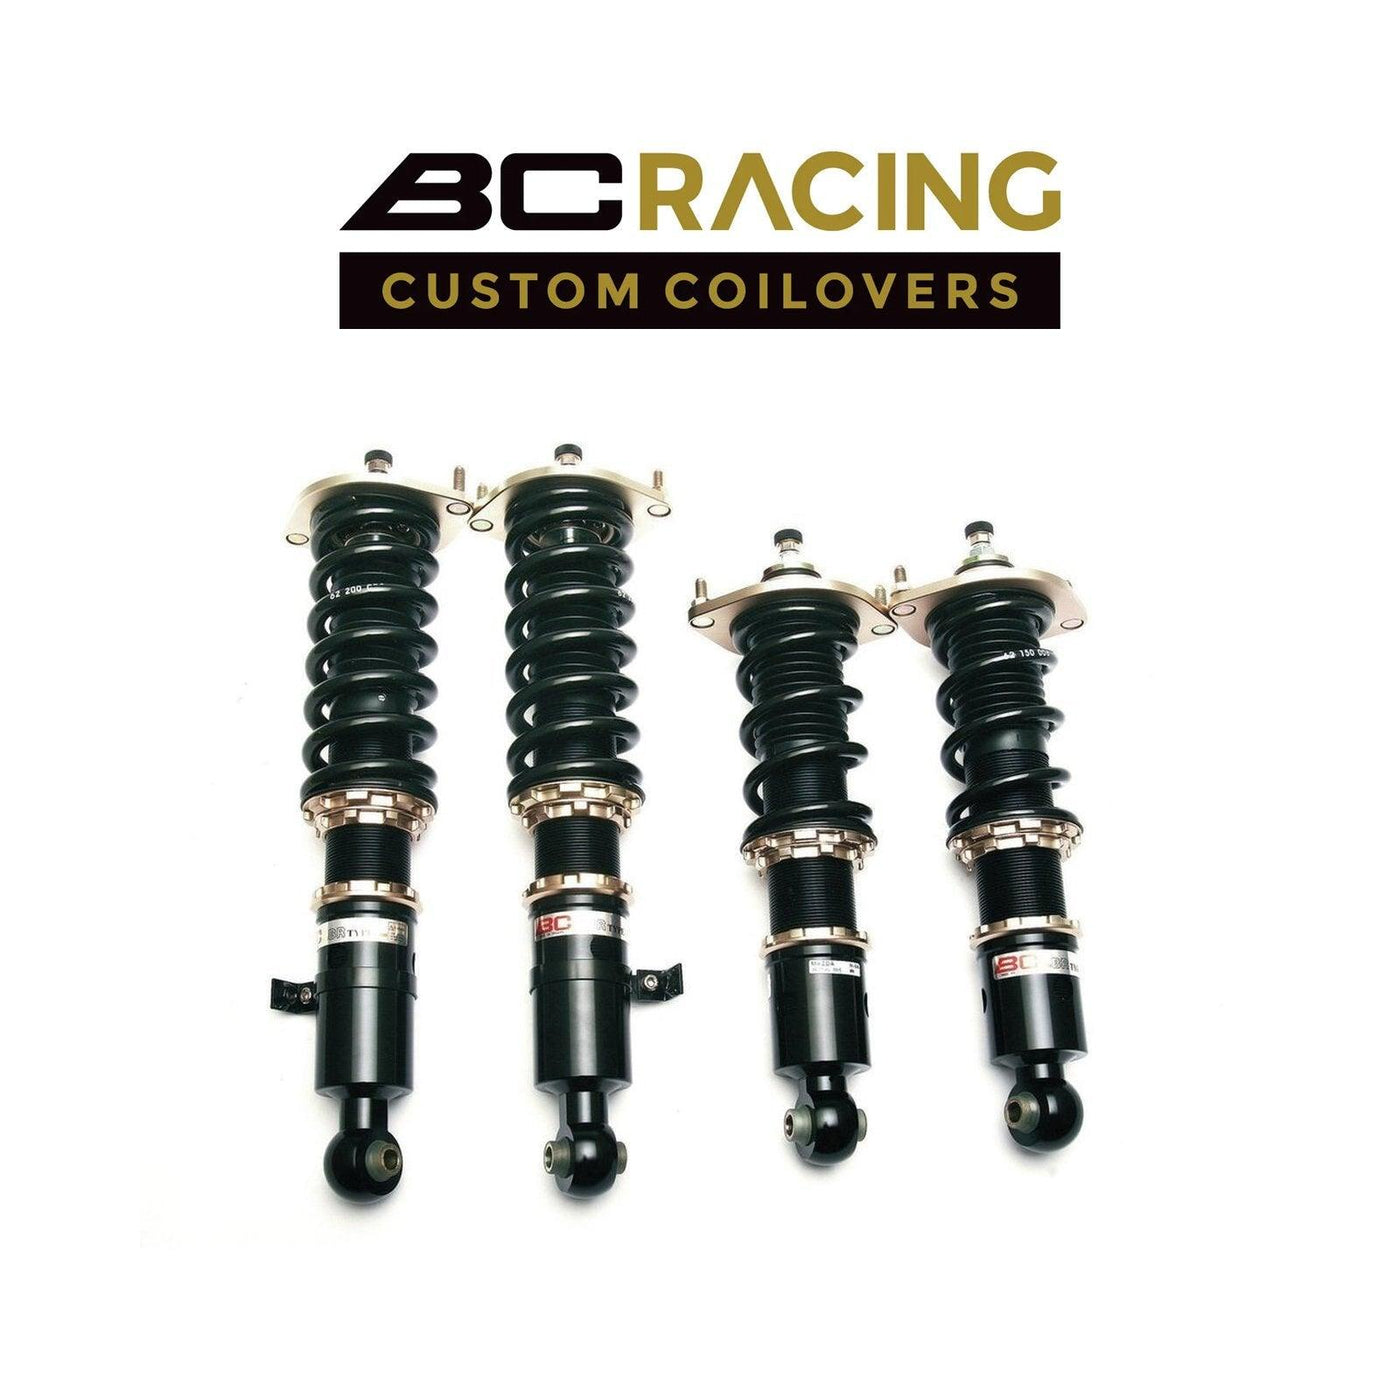 BC Racing Coilovers 2013 INFINITI FX37 RWD - Attacking the Clock Racing